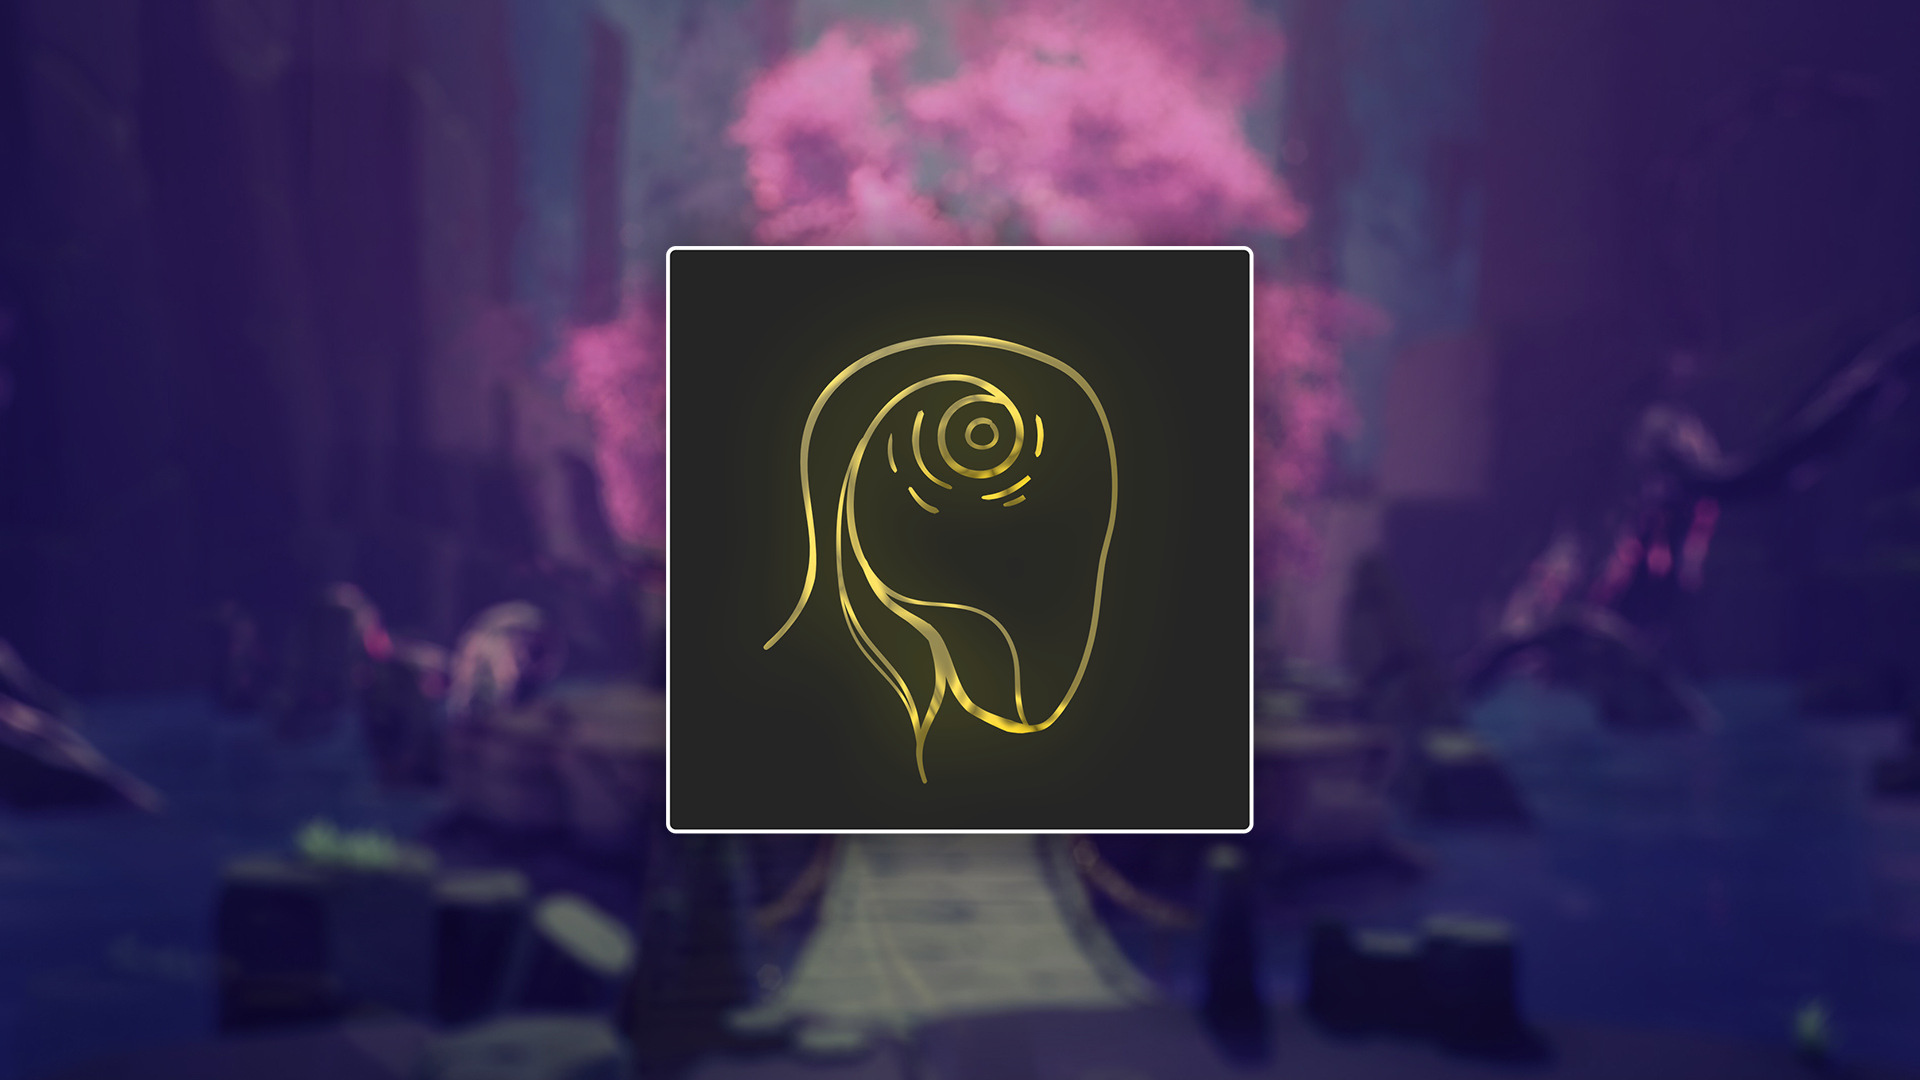 Icon for Adept